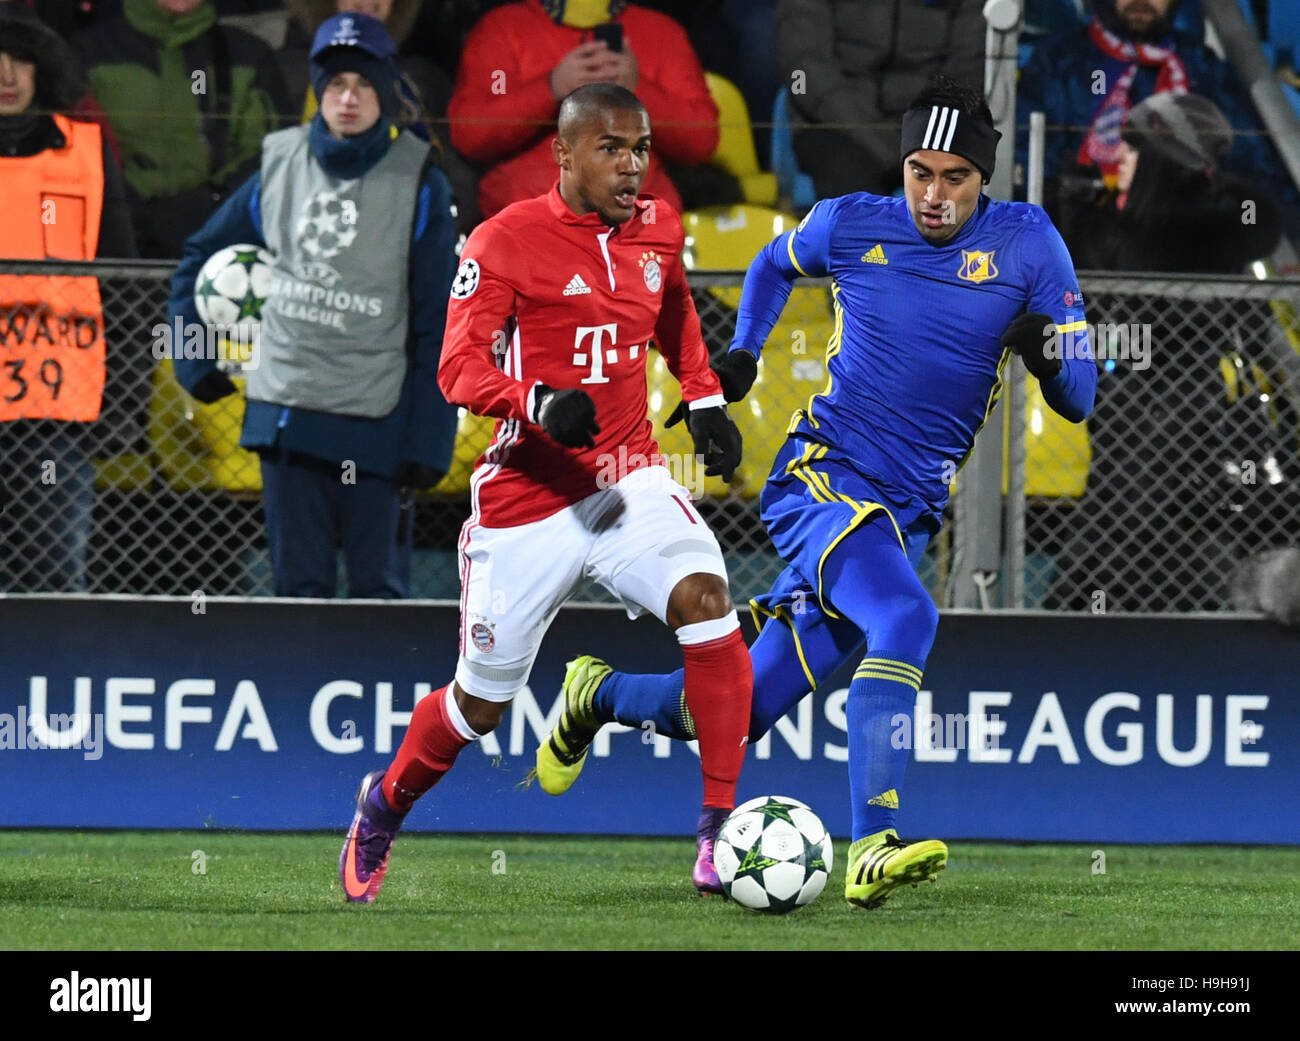 Rostov-on-Don, Russia. 23rd Nov, 2016. Douglas Costa (L) from FC Bayern Munich and Christian Noboa from FC Rostov vie for the ball during the Champions League soccer match between FC Rostov and FC Bayern Munich in the Olimp-2 Stadium in Rostov-on-Don, Russia, 23 November 2016. Photo: Peter Kneffel/dpa/Alamy Live News Stock Photo